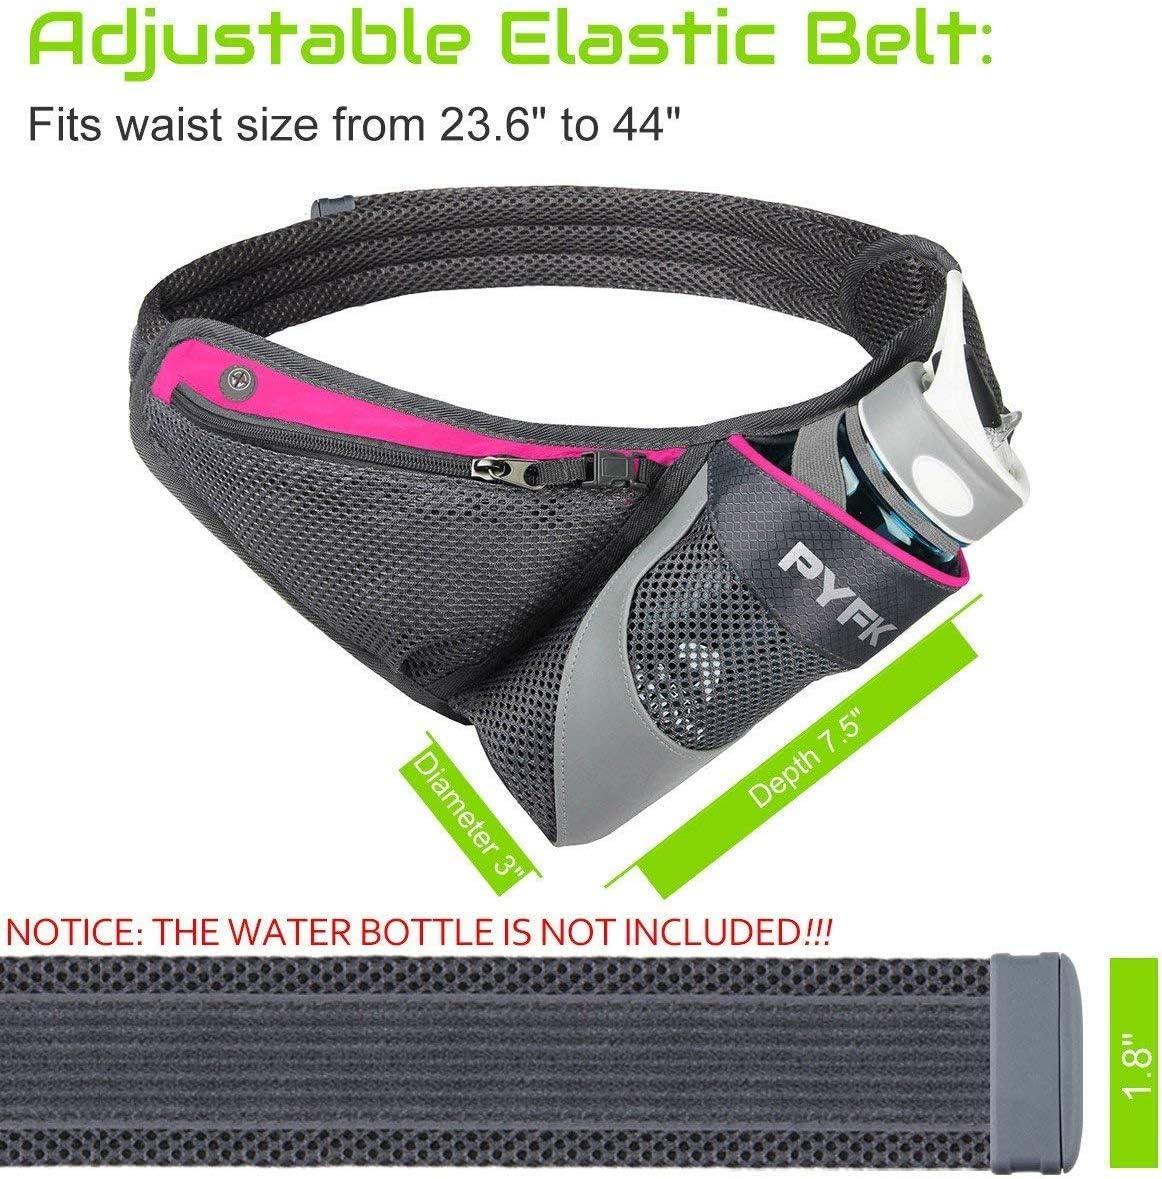  PYFK Running Belt Hydration Waist Pack with Water Bottle Holder  for Men Women Waist Pouch Fanny Bag Reflective ((Bottle Not Included)) :  Sports & Outdoors